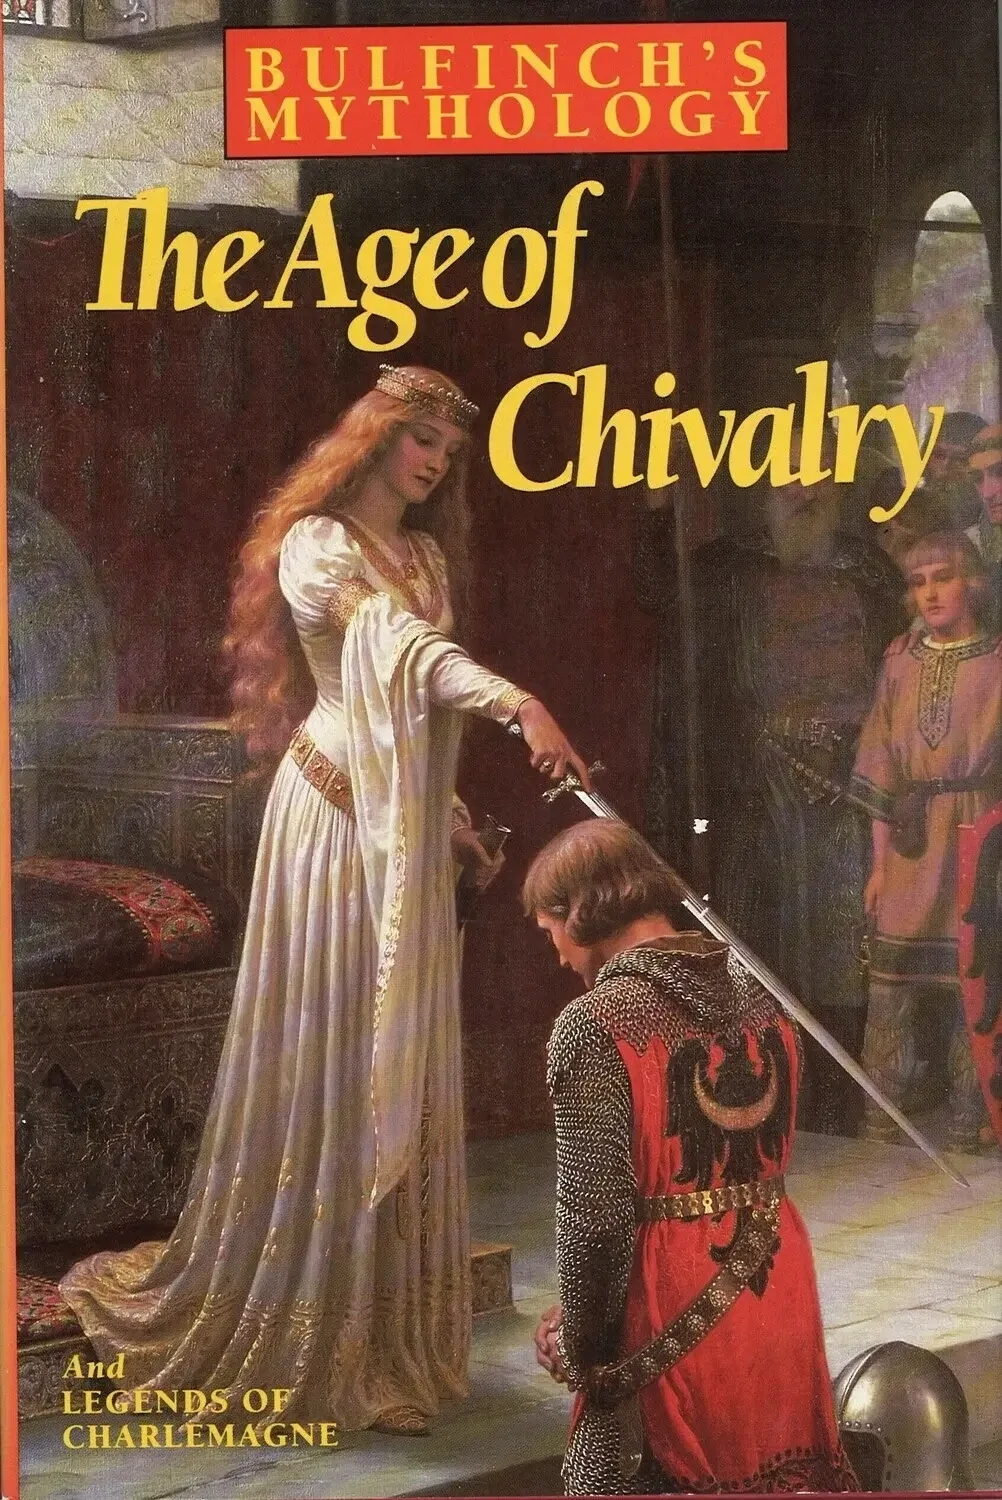 Bulfinch's Mythology The Age of Chivalry and...